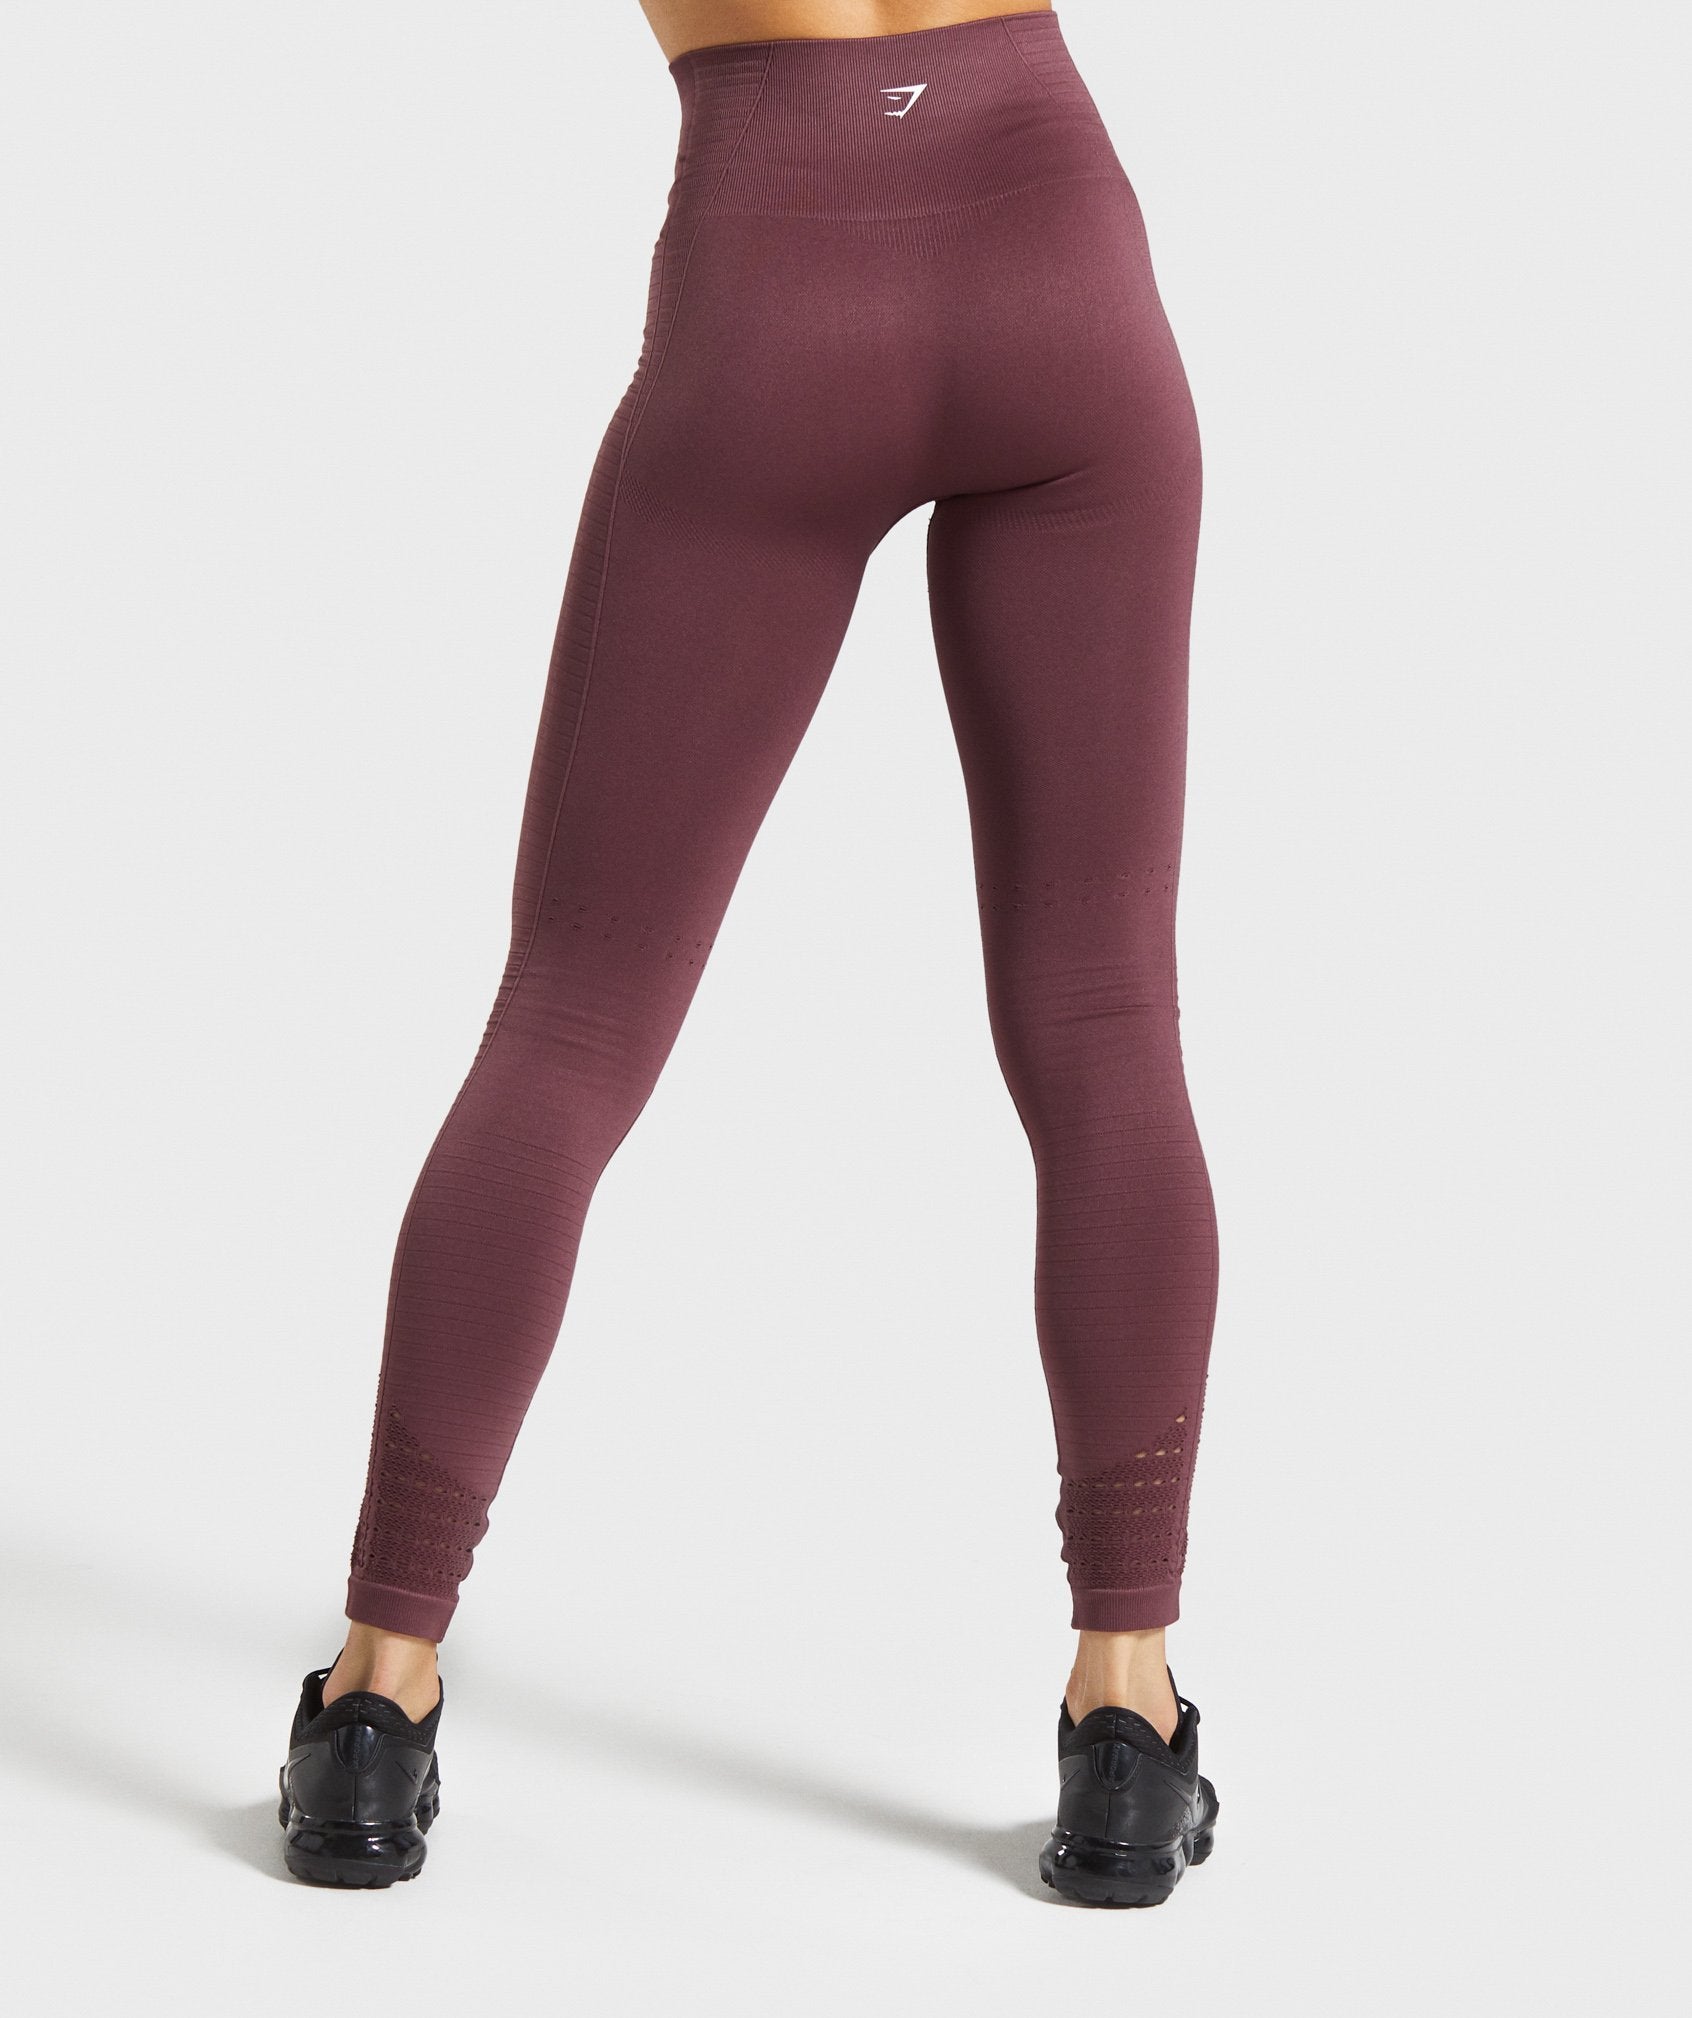 Energy+ Seamless Leggings in Berry Red - view 2